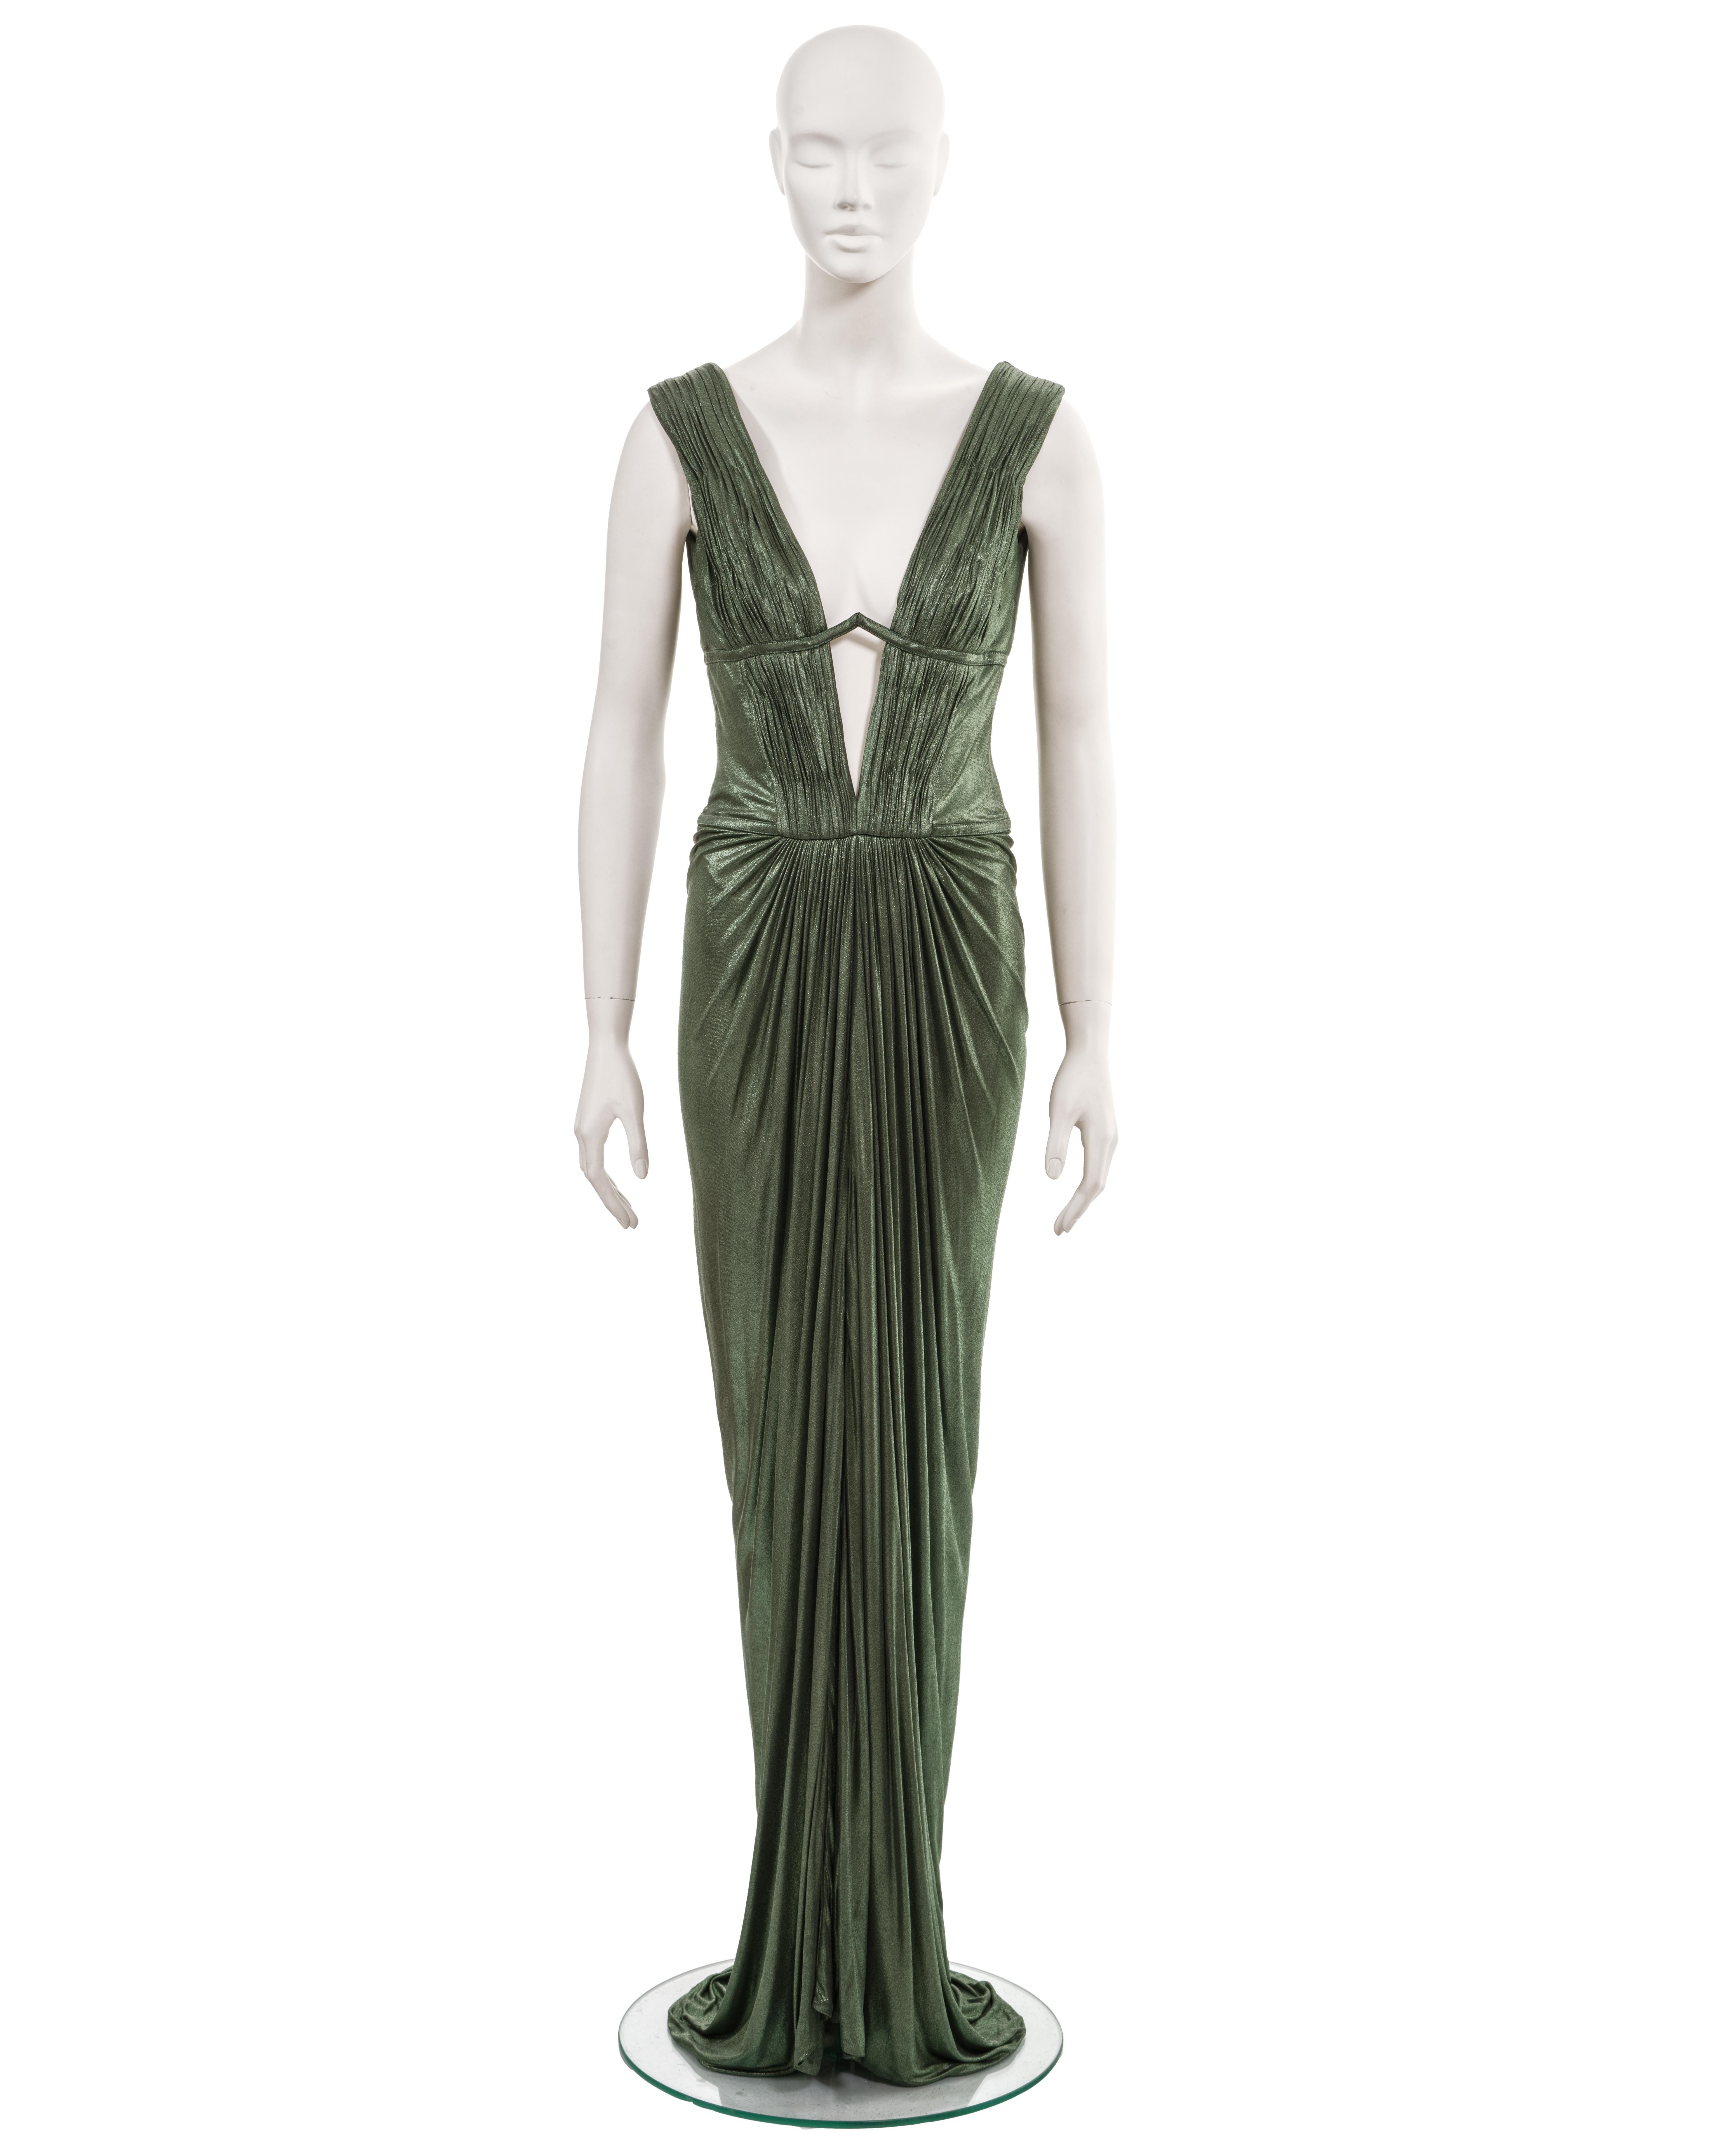 ▪ Roberto Cavalli 'Cleopatra' evening dress
▪ Fall-Winter 2007
▪ Sold by One of a Kind Archive
▪ Metallic green cupro jersey 
▪ Finely pleated bodice 
▪ Plunging v-neck with underwire bra detail
▪ Floor-length draped skirt with vertical pleats on